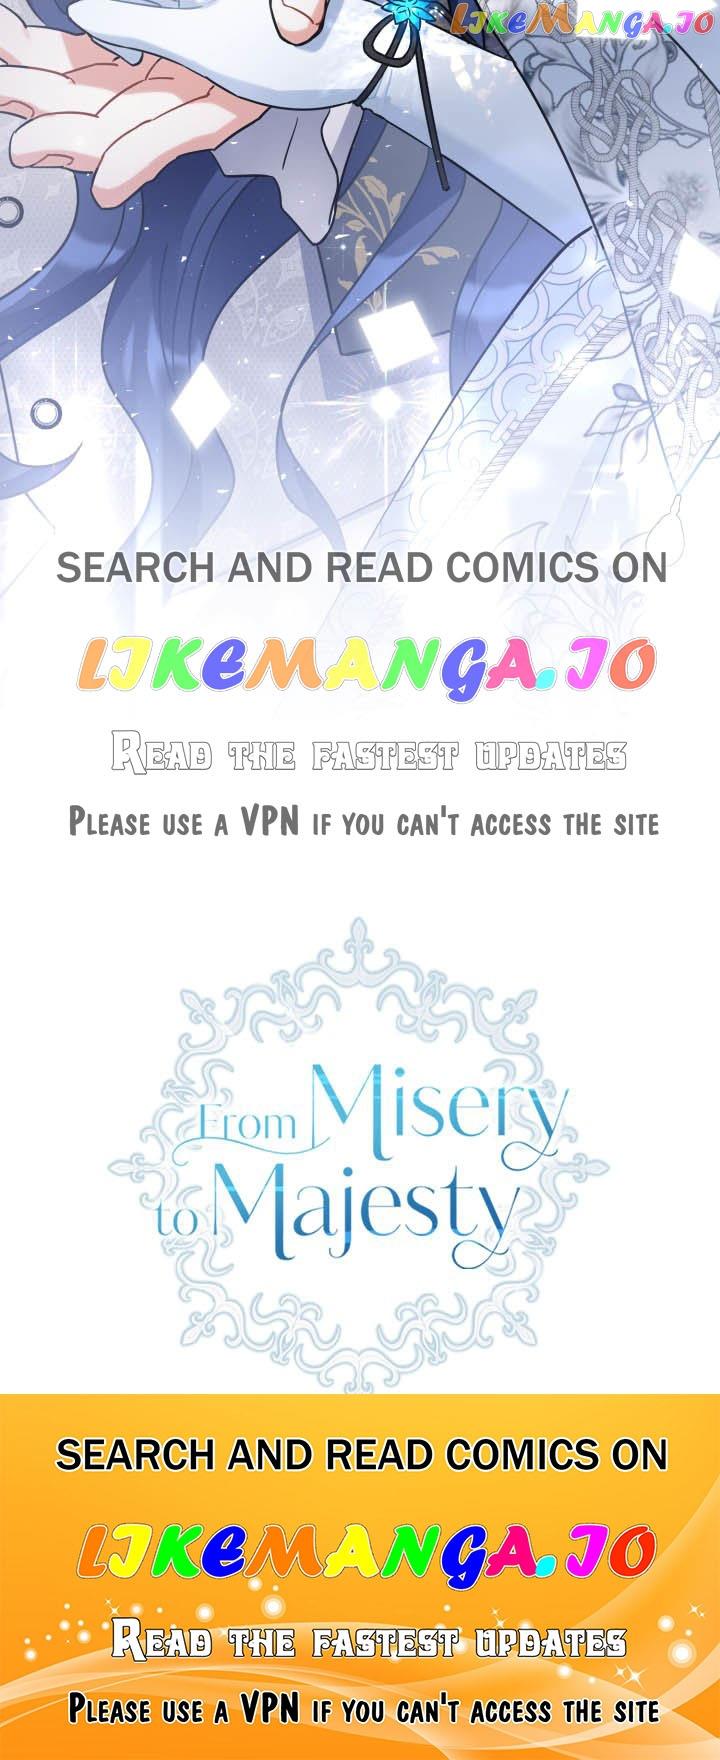 From Misery to Majesty chapter 38